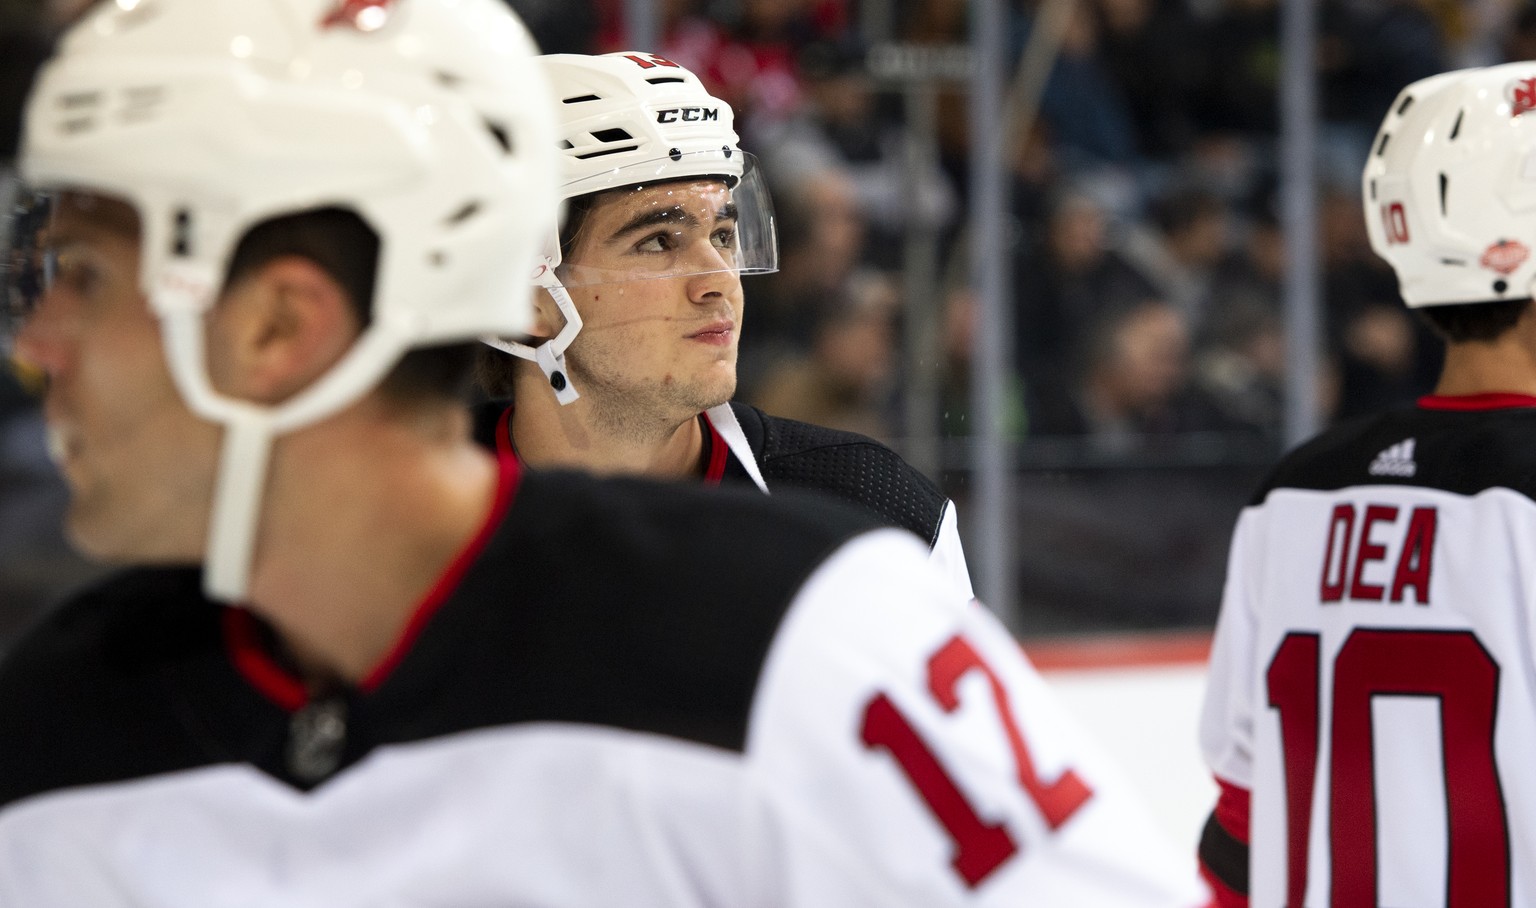 New Jersey Devils Nico Hischier, center, pictured next to New Jersey Devils Ben Lovejoy , left, and New Jersey Devils Jean-Sebastien Dea, right, during the warm up prior a NHL friendly game between Sw ...